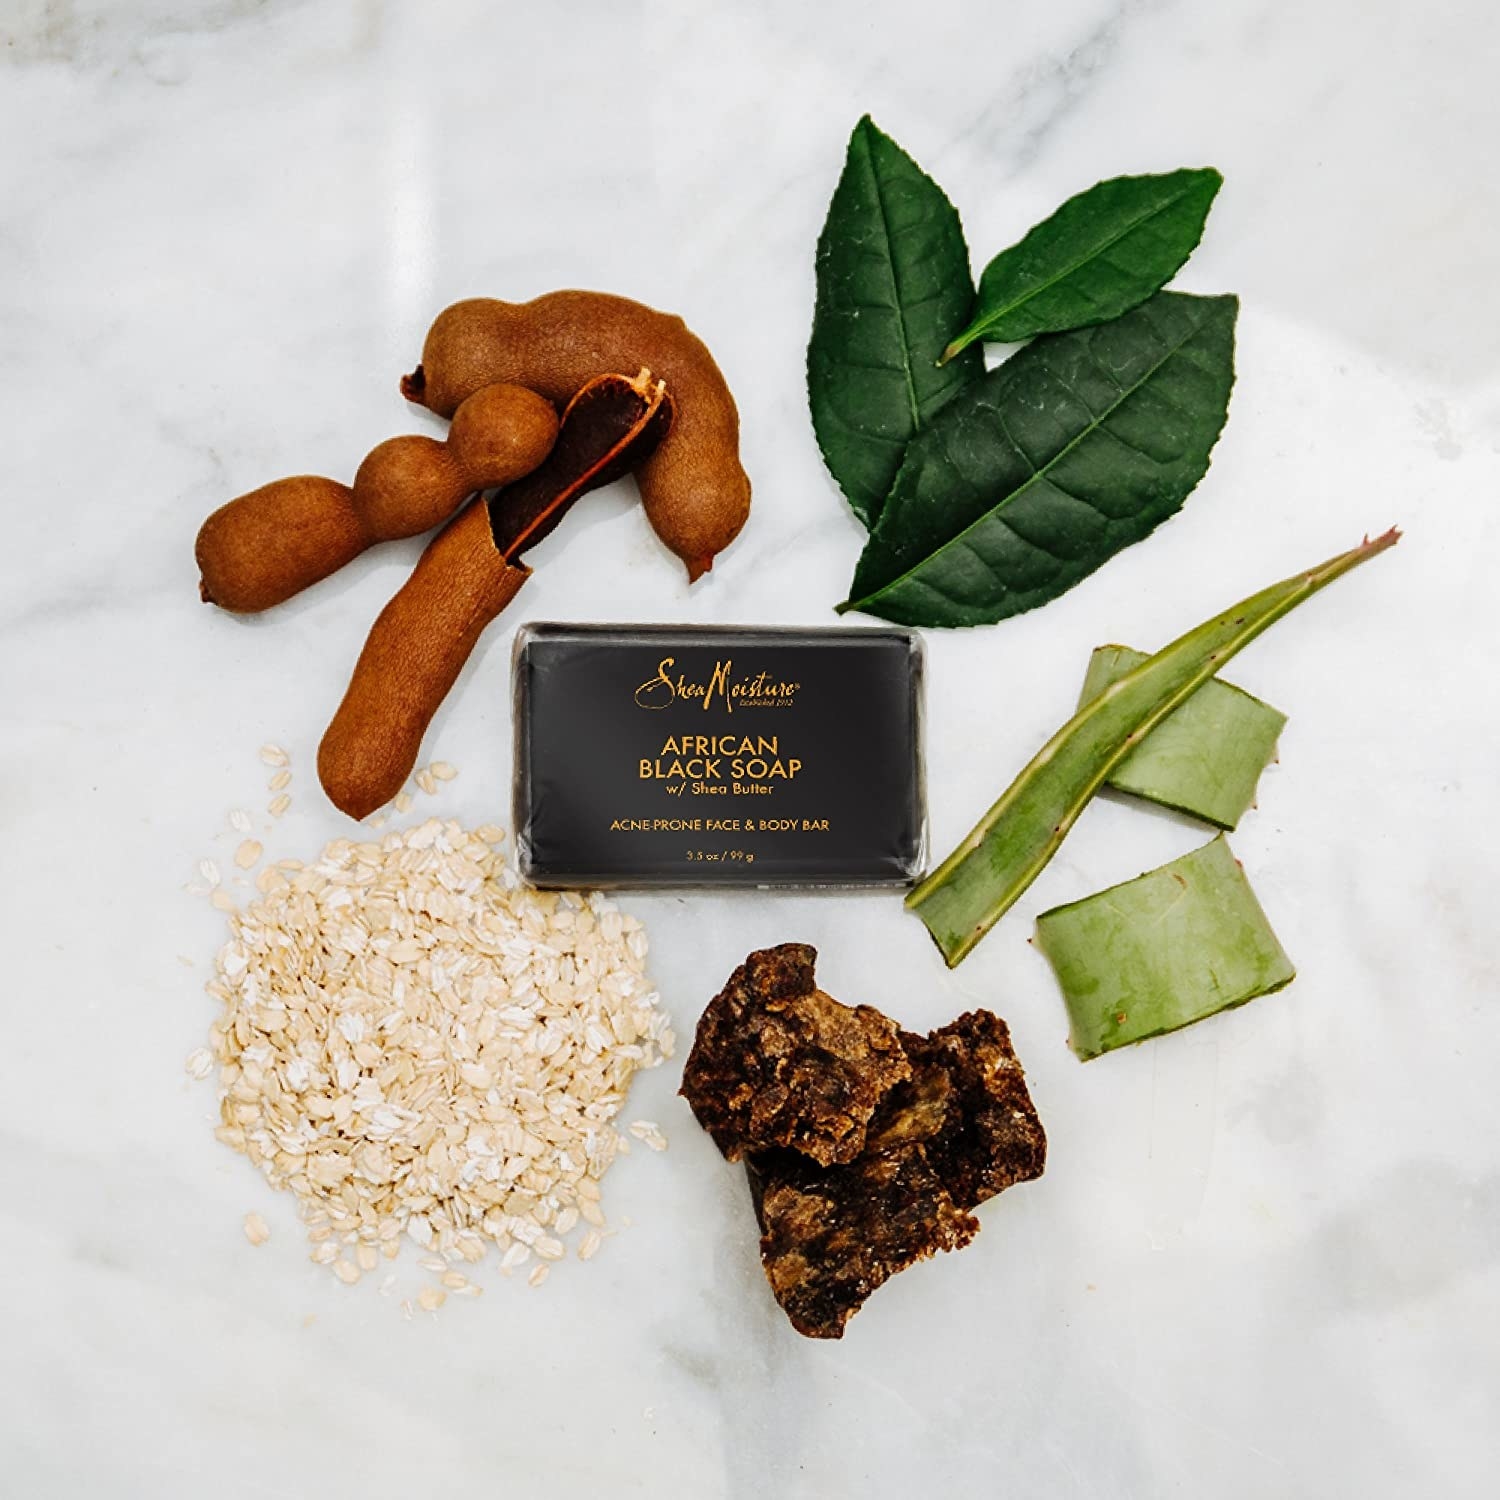 the bar of black soap surrounded by some ingredients